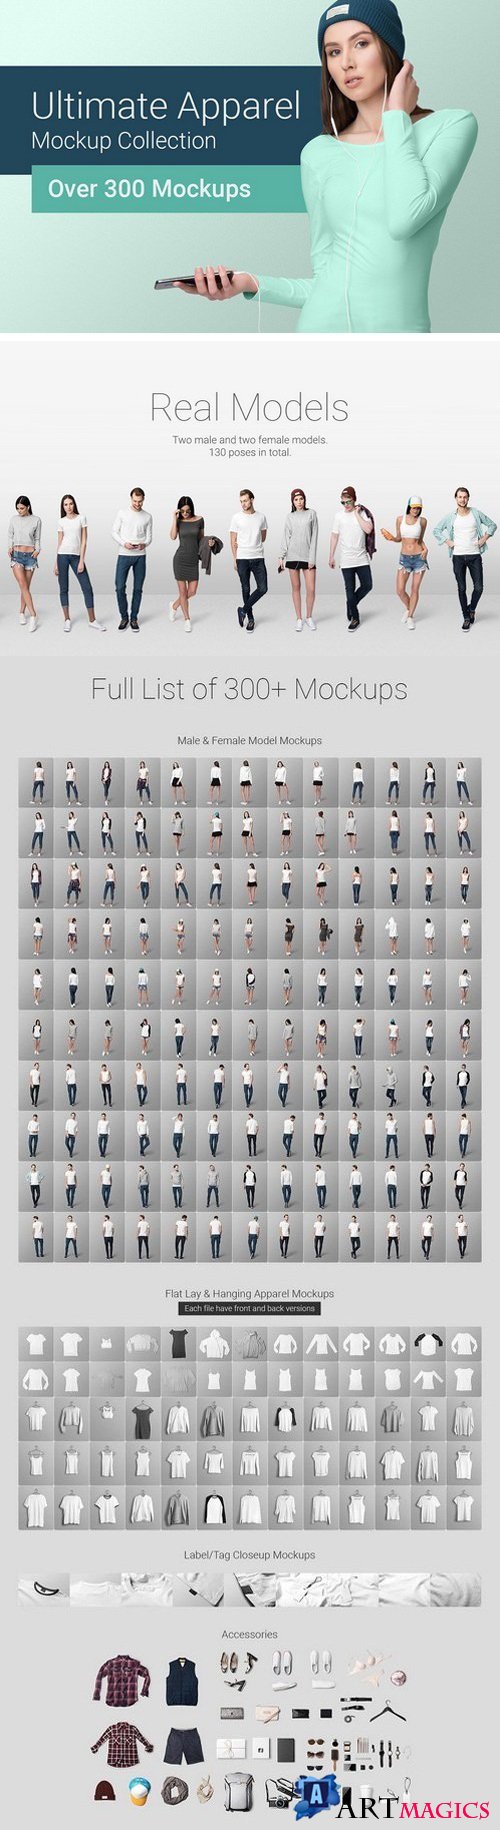 Ultimate Apparel Mockup Collection 1575498